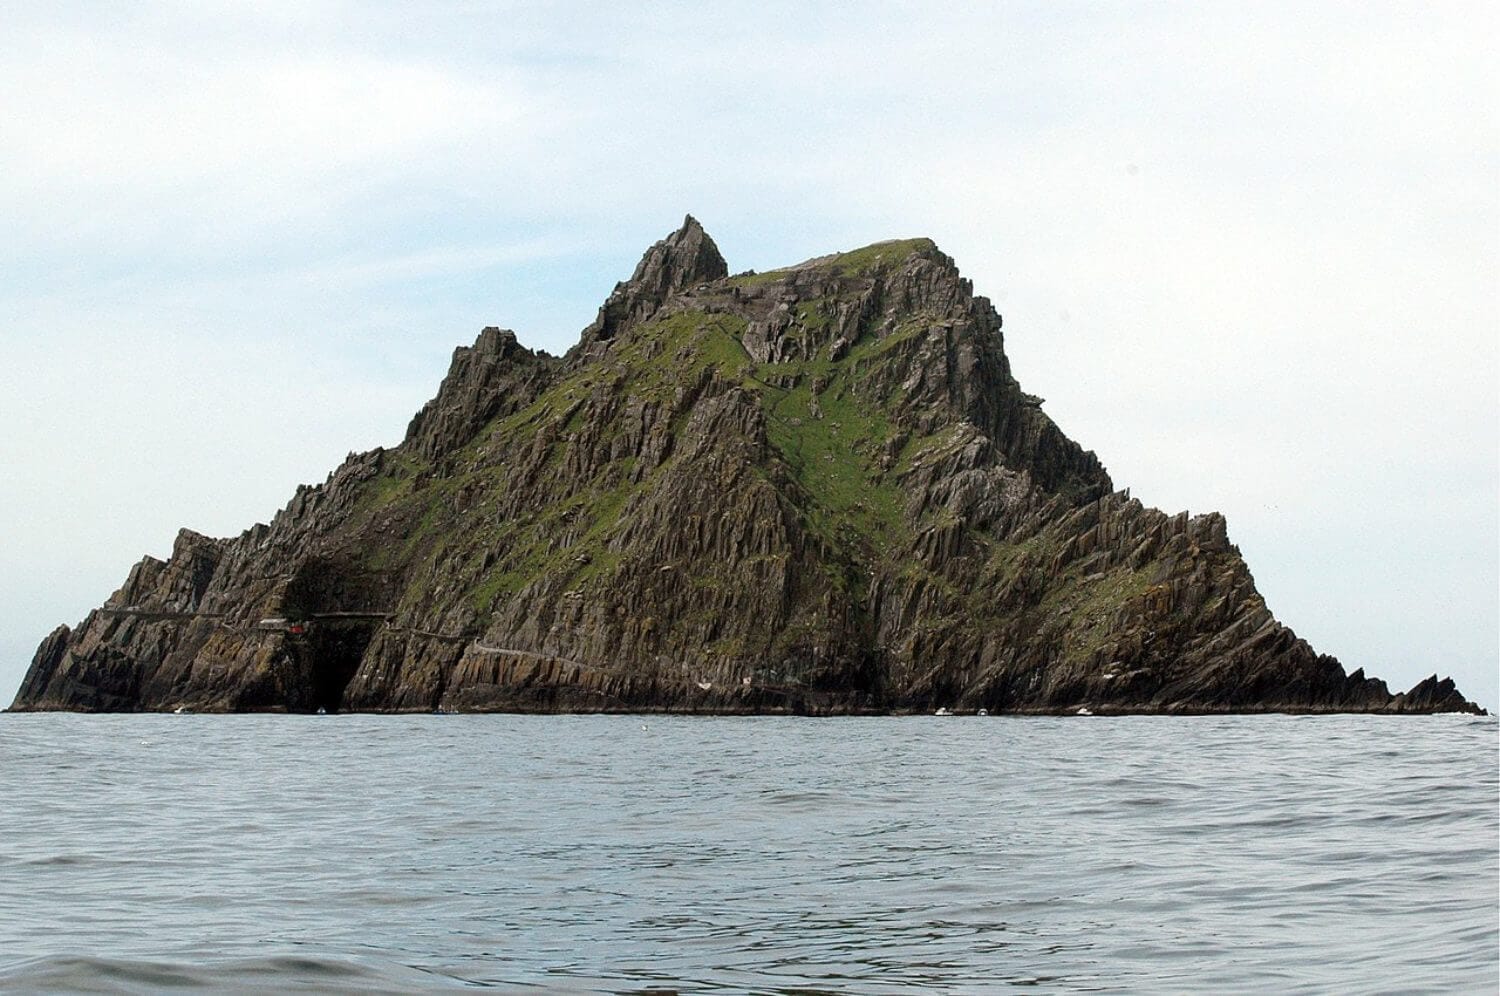 Skellig Michael - Wikimedia Commons photo by Maureen